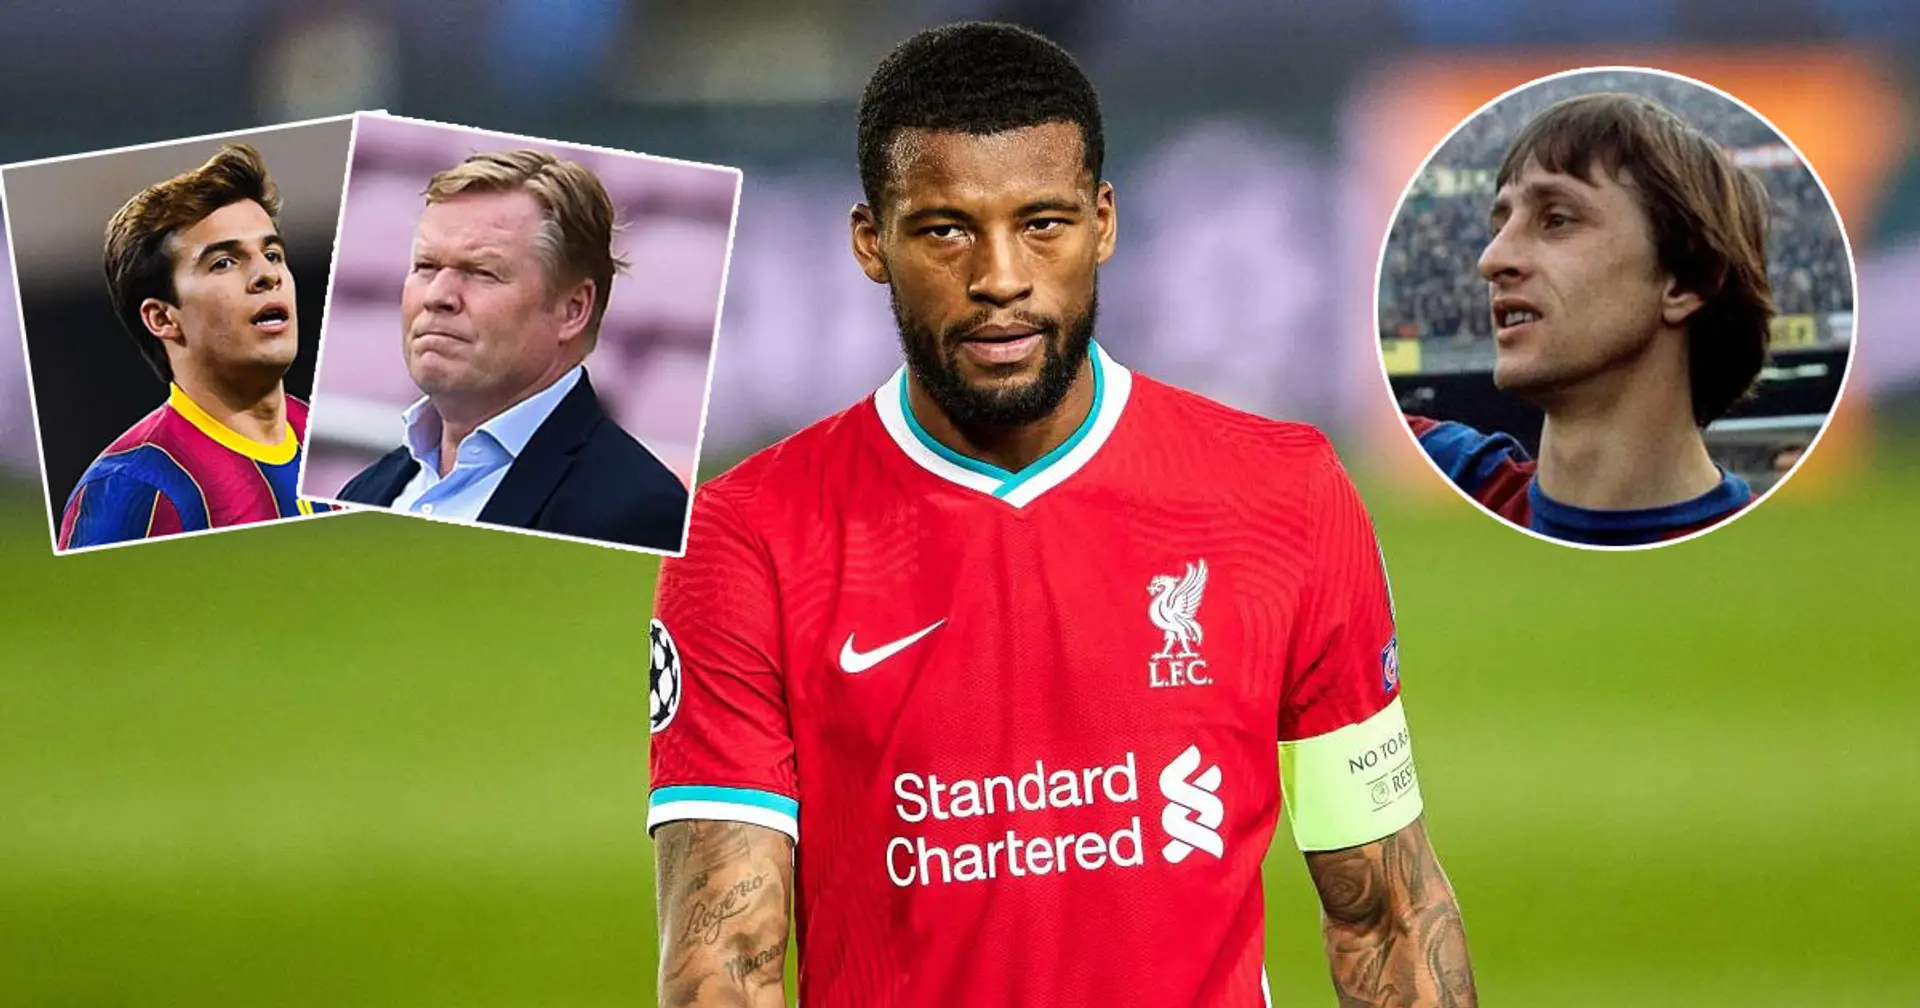 4 PROs and 2 CONs of Barca missing out on Wijnaldum